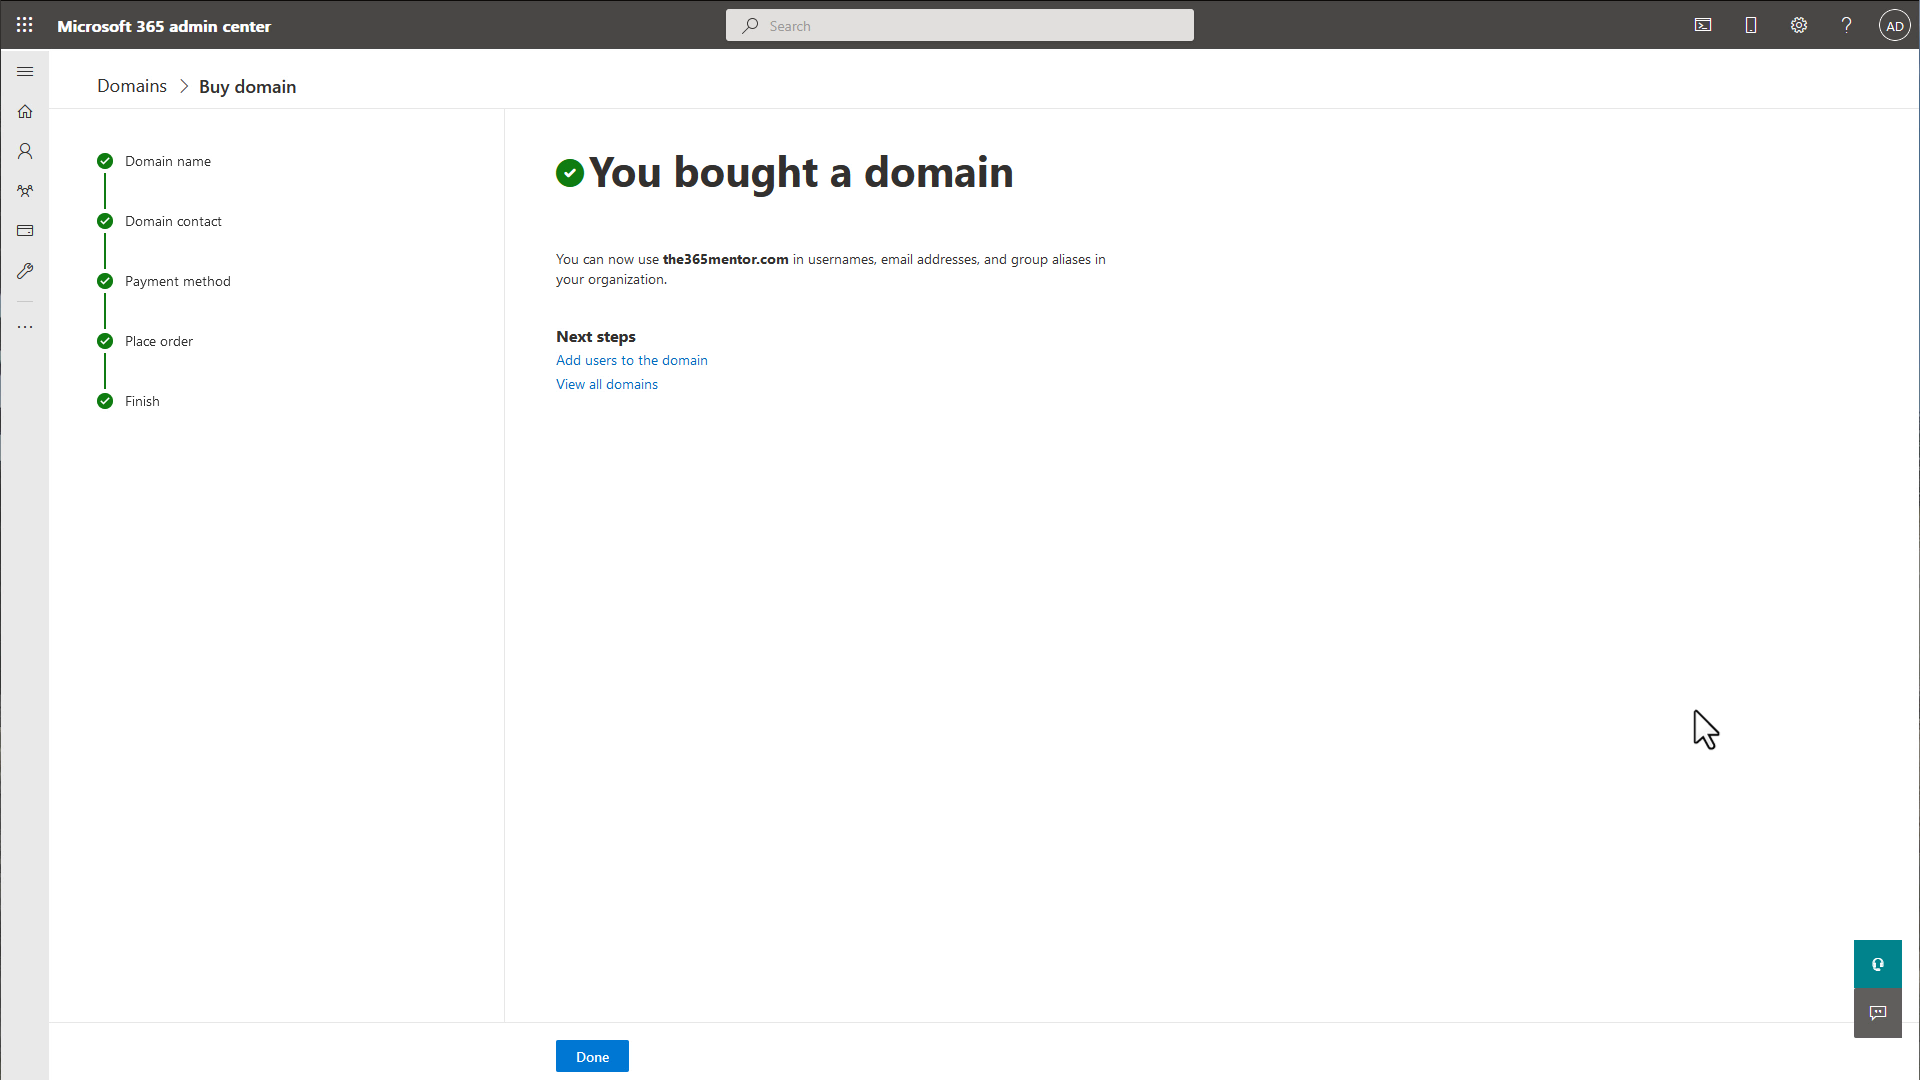 Buying a domain with Microsoft 365 - Confirmation